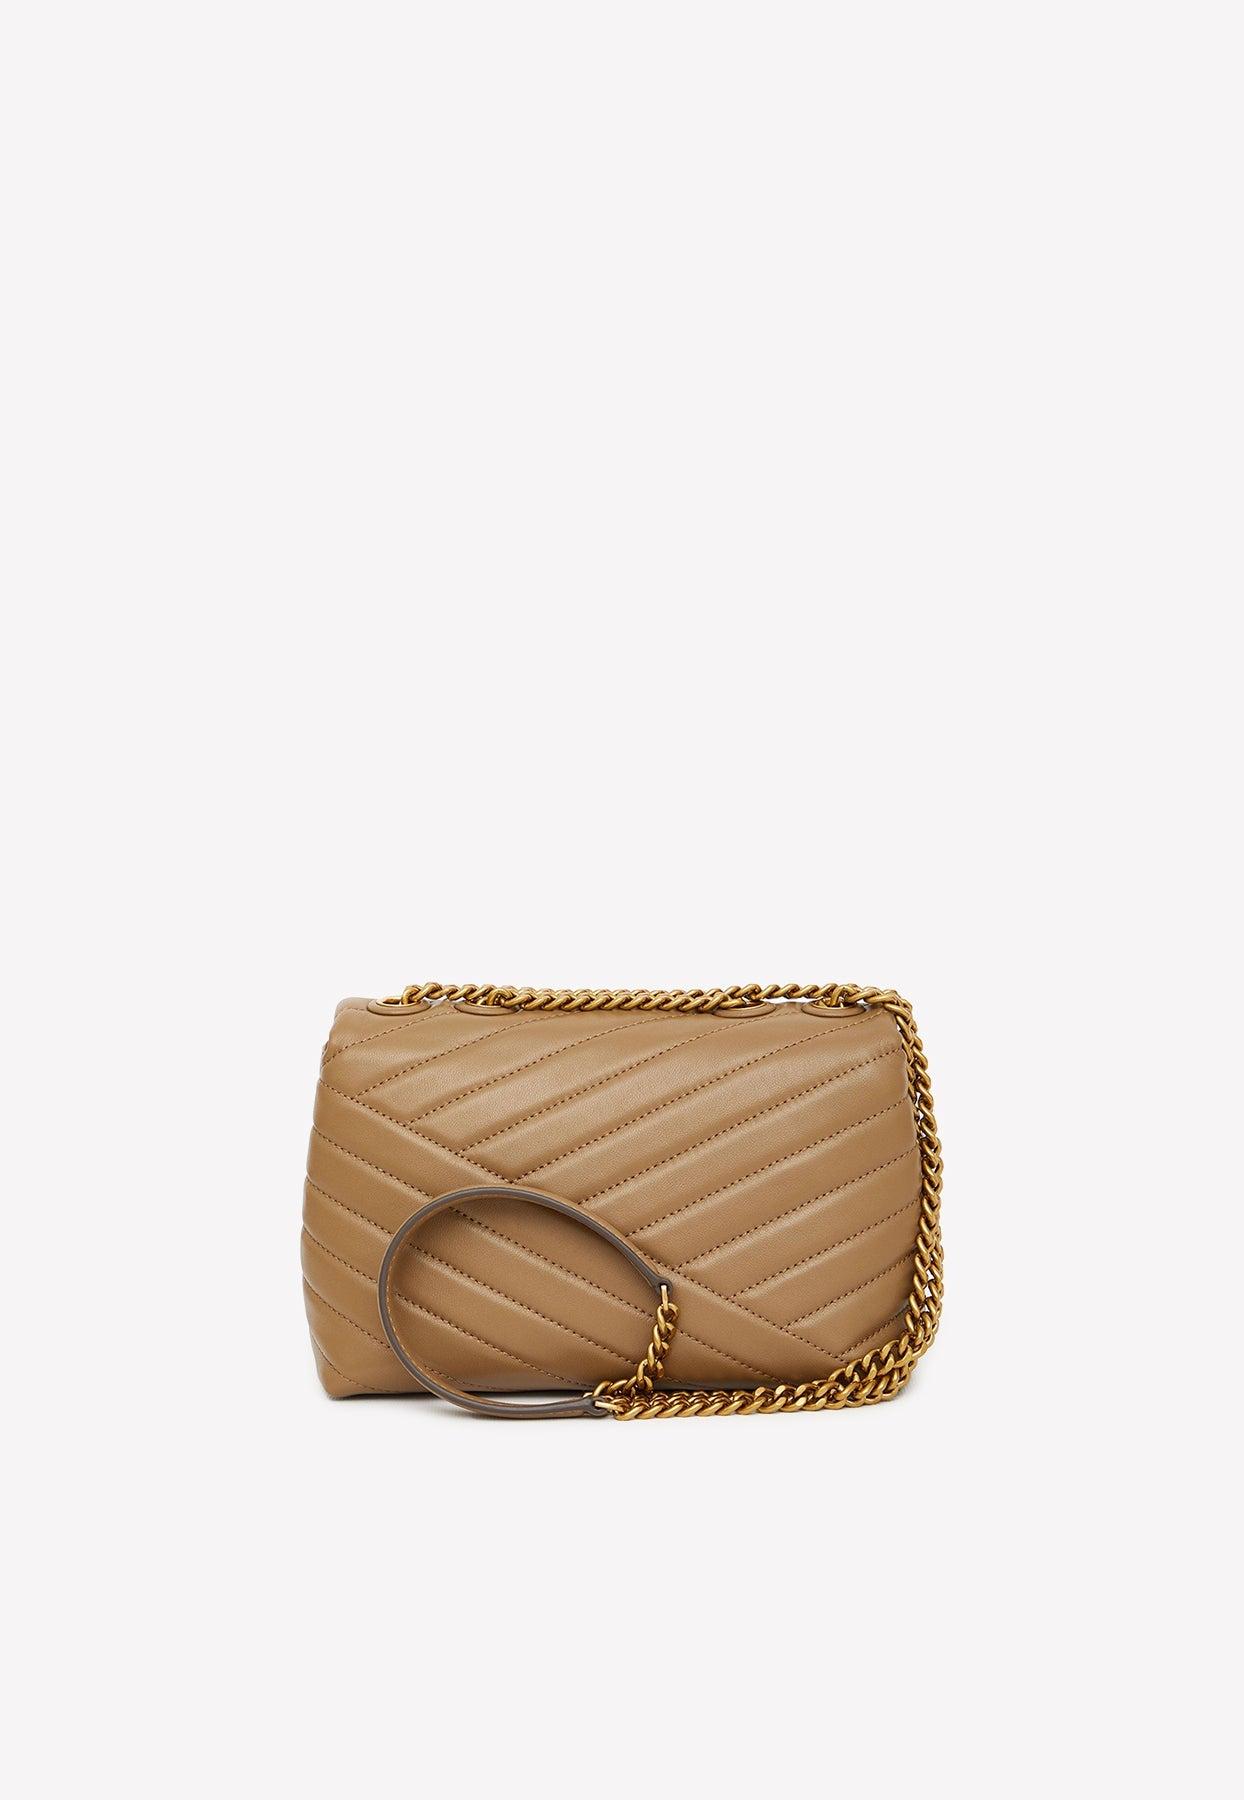 Tory Burch Small Kira Chevron Quilted Leather Crossbody Bags in Brown